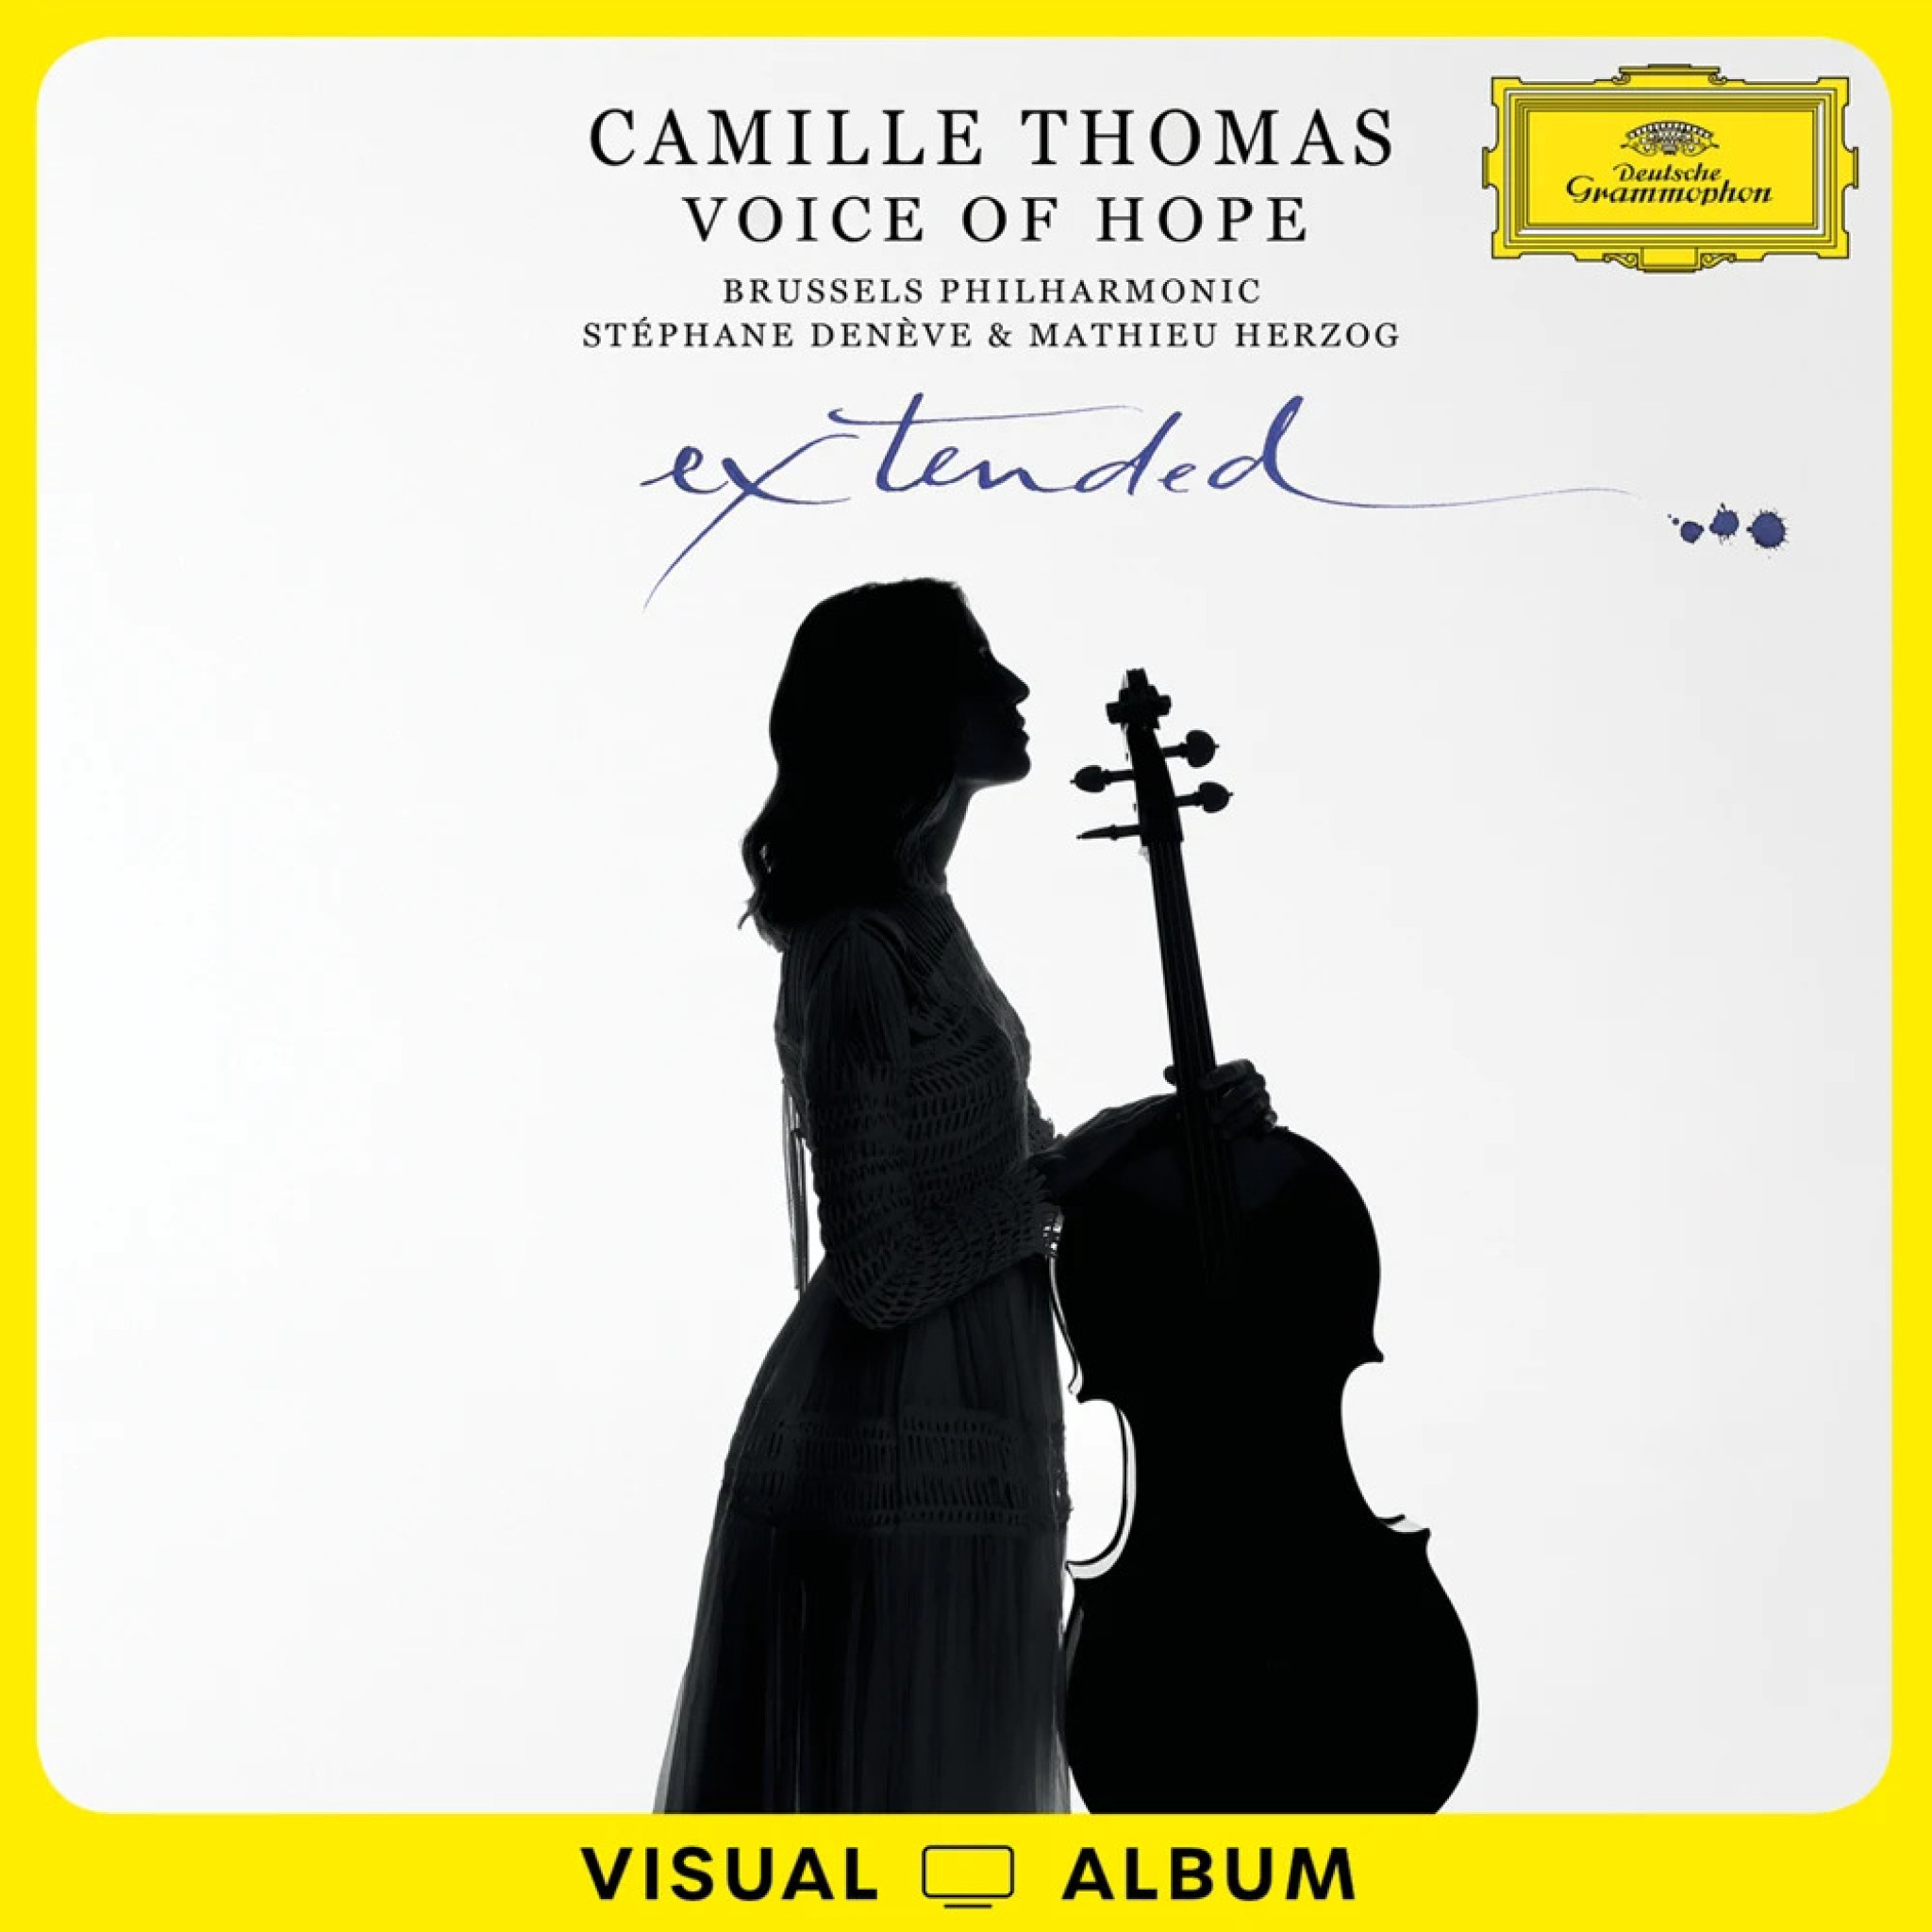 Camille Thomas - Voice of Hope (Extended edition / visual album) cover